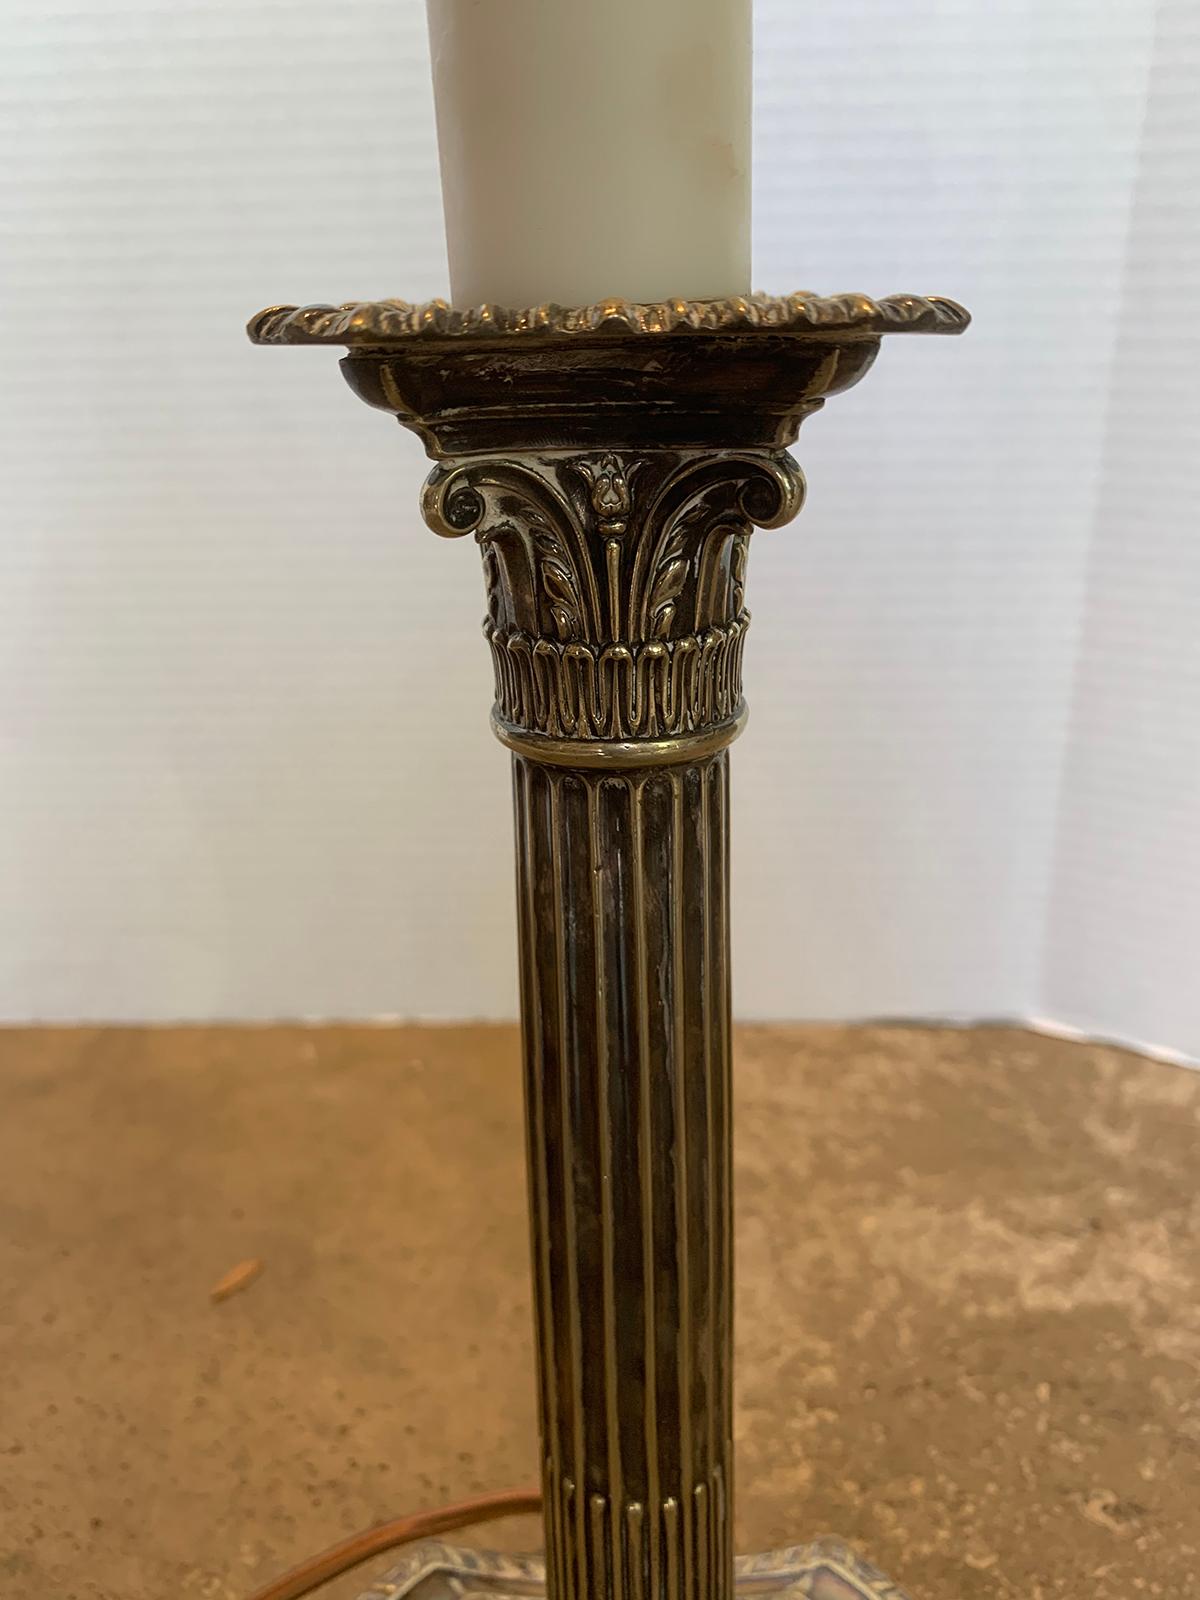 19th-20th Century English Neoclassical Silver Plate Column Candlestick Lamp For Sale 4